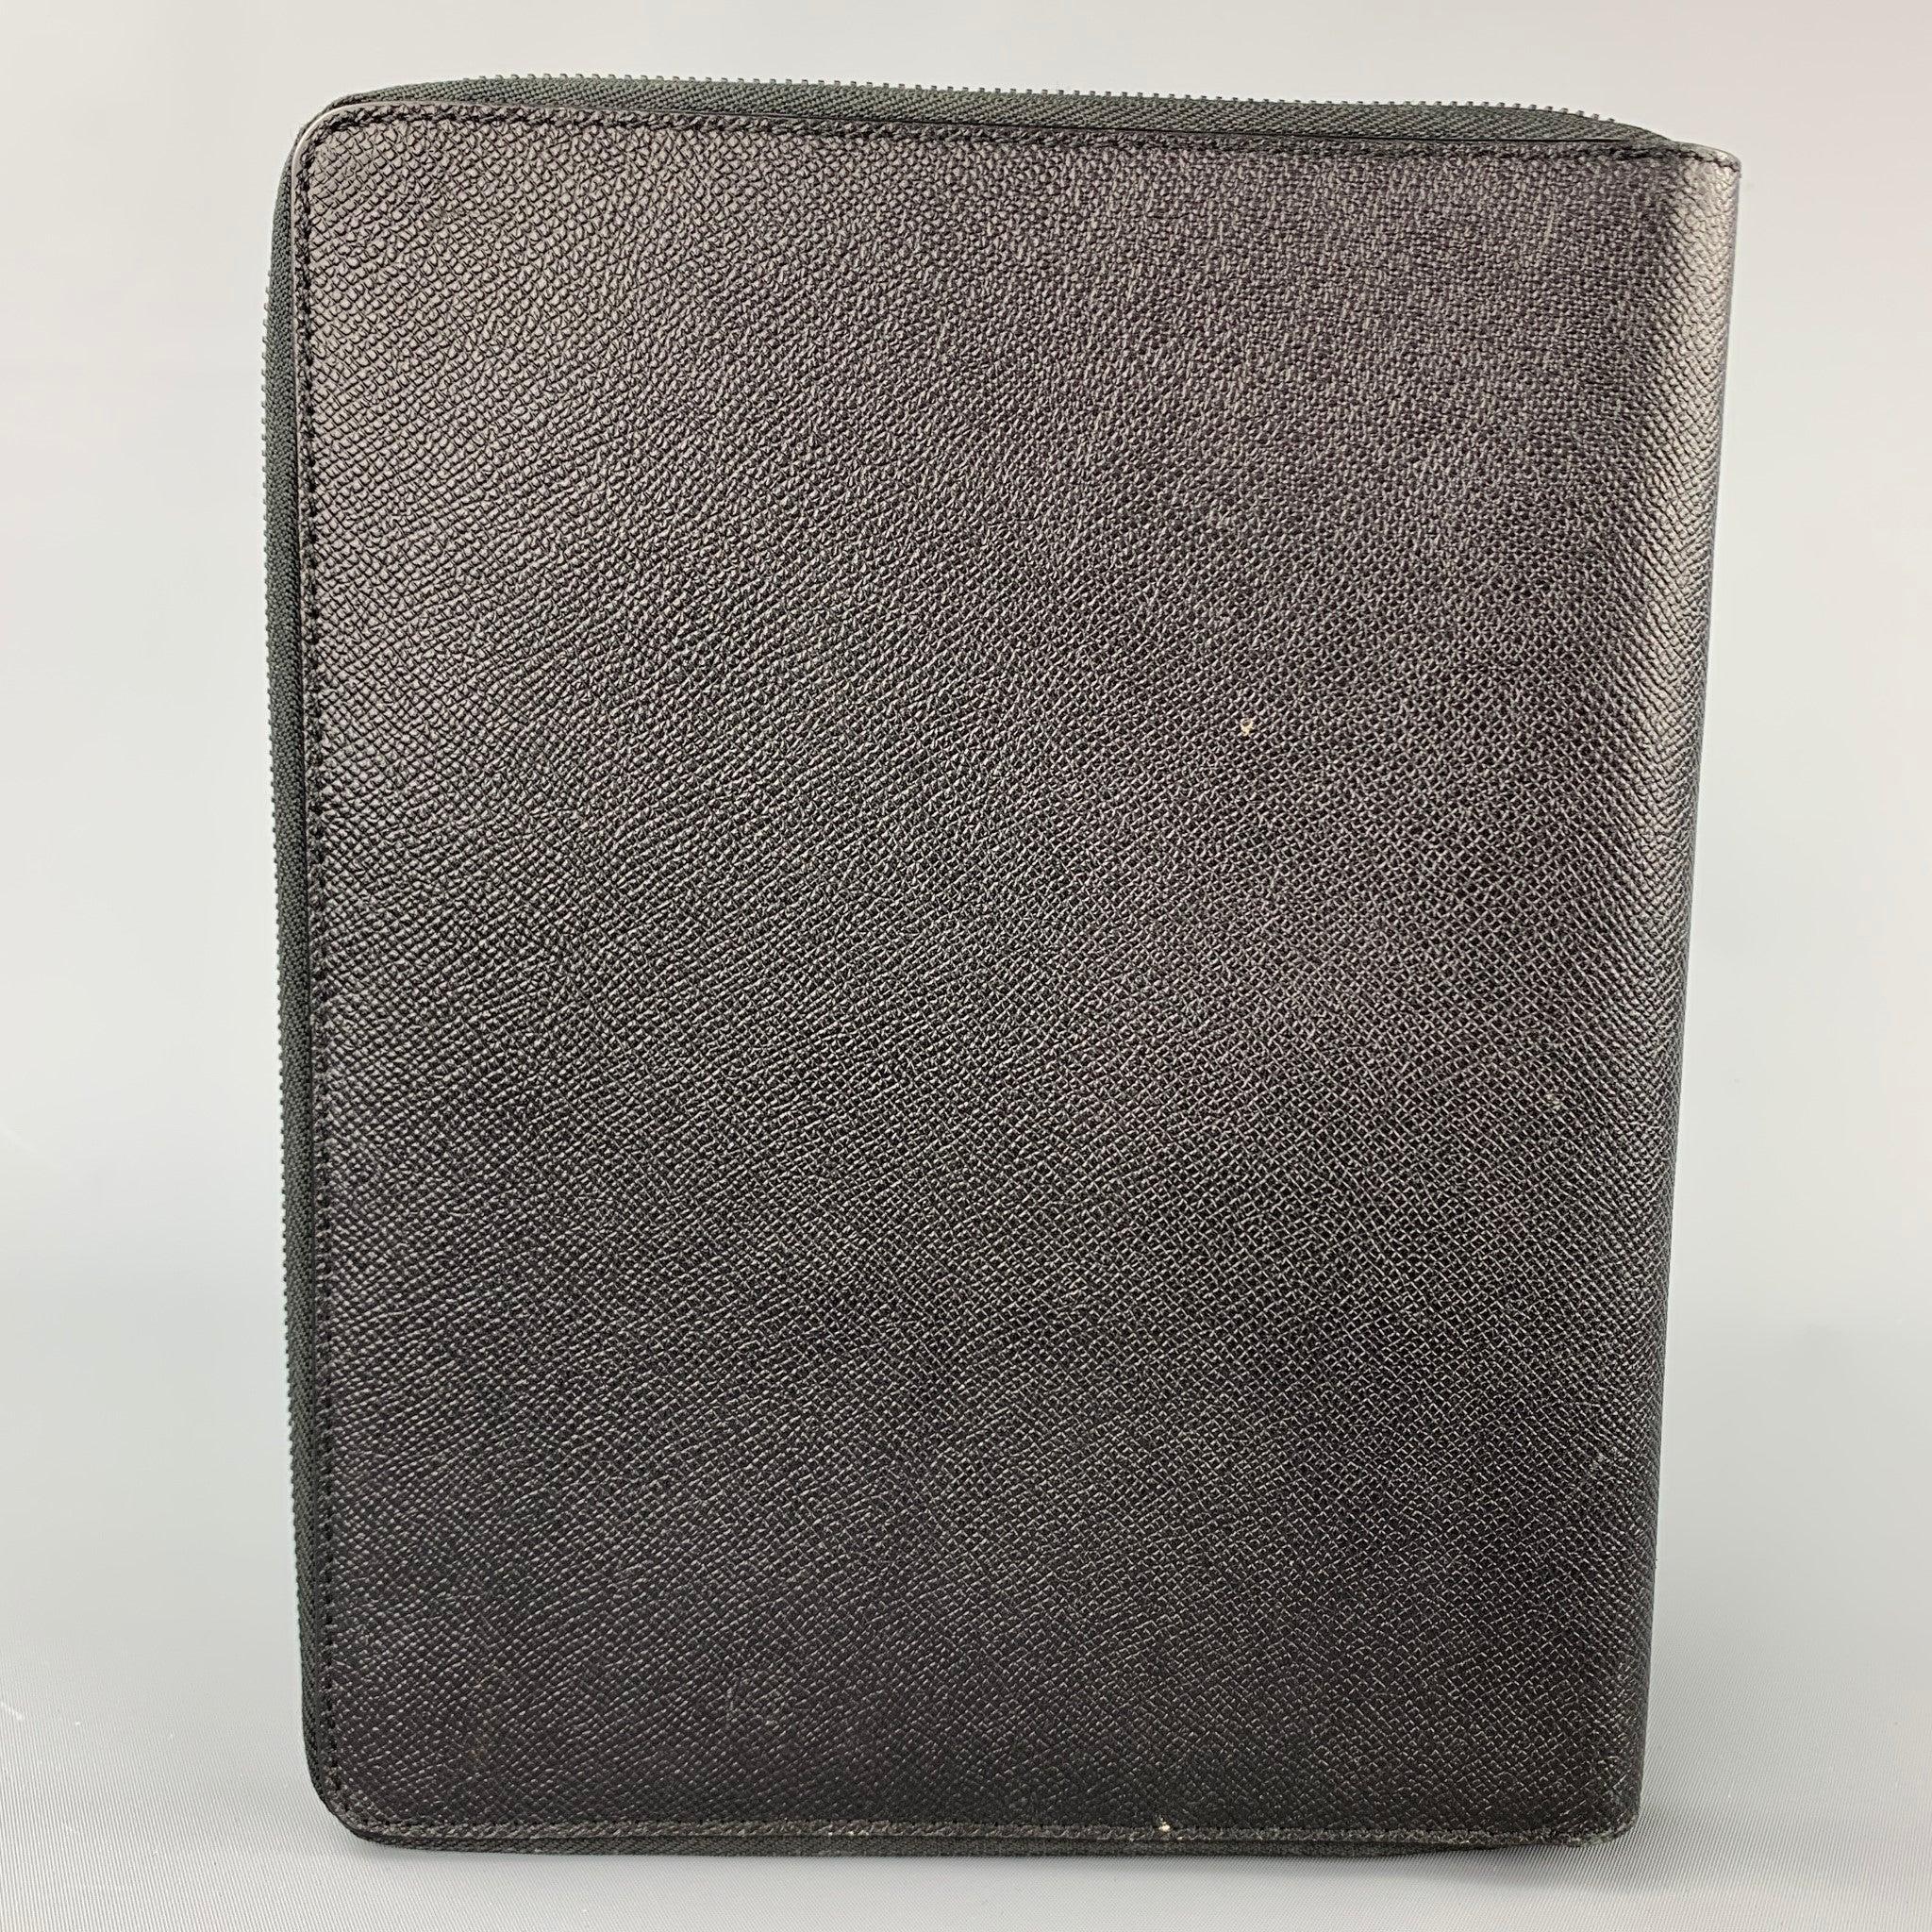 BURBERRY iPad Case comes in a black pebble grain leather featuring a inner slot and a zip up closure. Made in Italy. Fits a regular iPad.
 Very Good
 Pre-Owned Condition. Case  
 

 Measurements: 
  Height: 10 inches Width: 8 inches 
  
  
  
 Sui